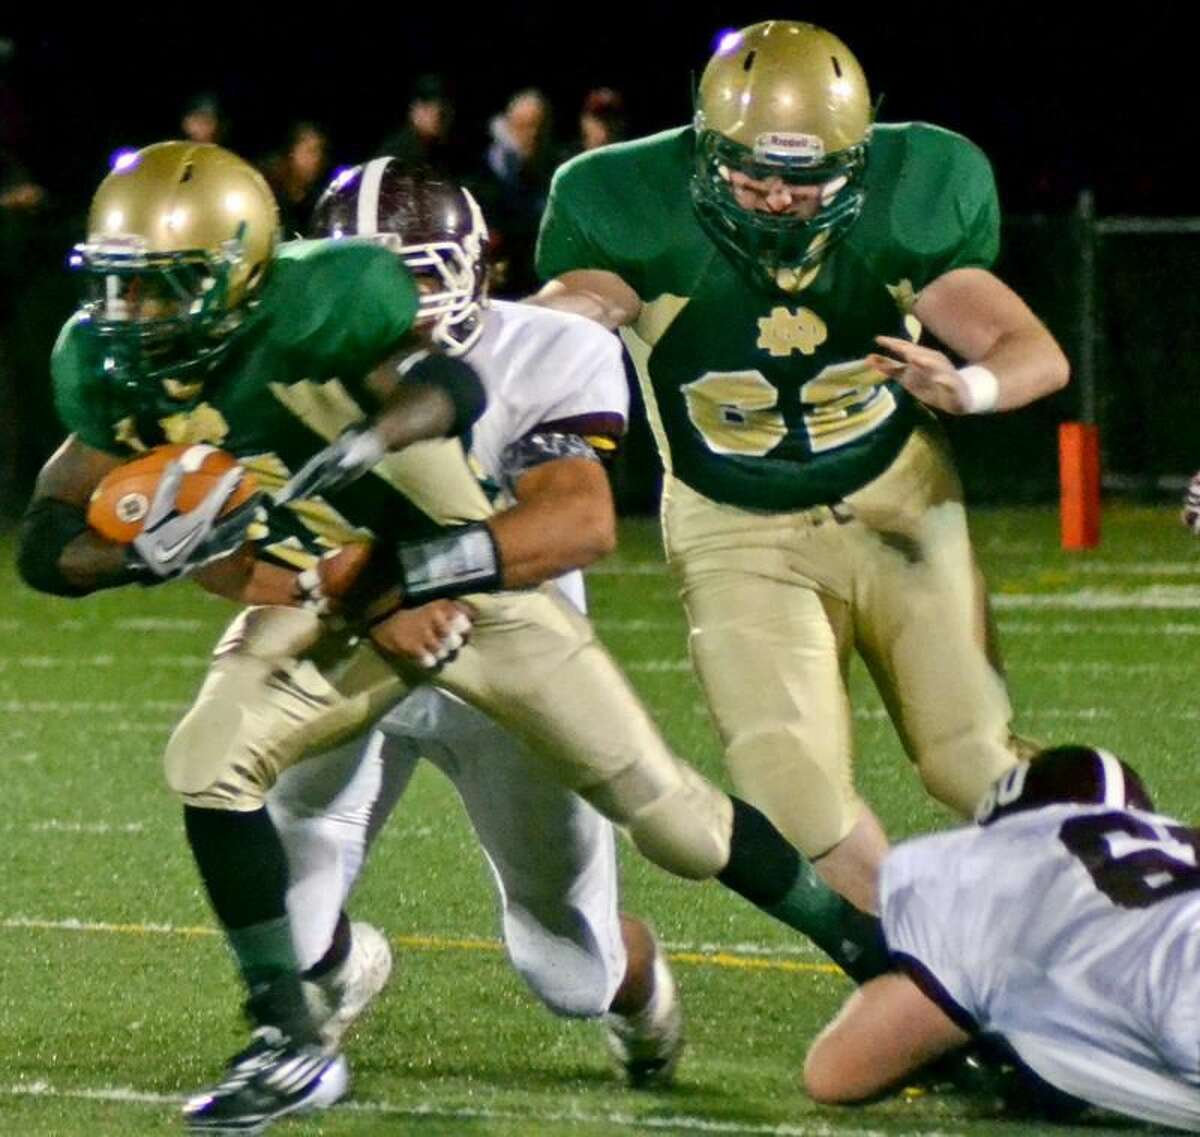 Photo by Sean Meenaghan/Register Notre Dame-West Haven running back Shawndel Evans fights for extra yards while North Haven's Andrew Savenelli tries to take him down in the Green Knights' 27-12 victory Friday night.